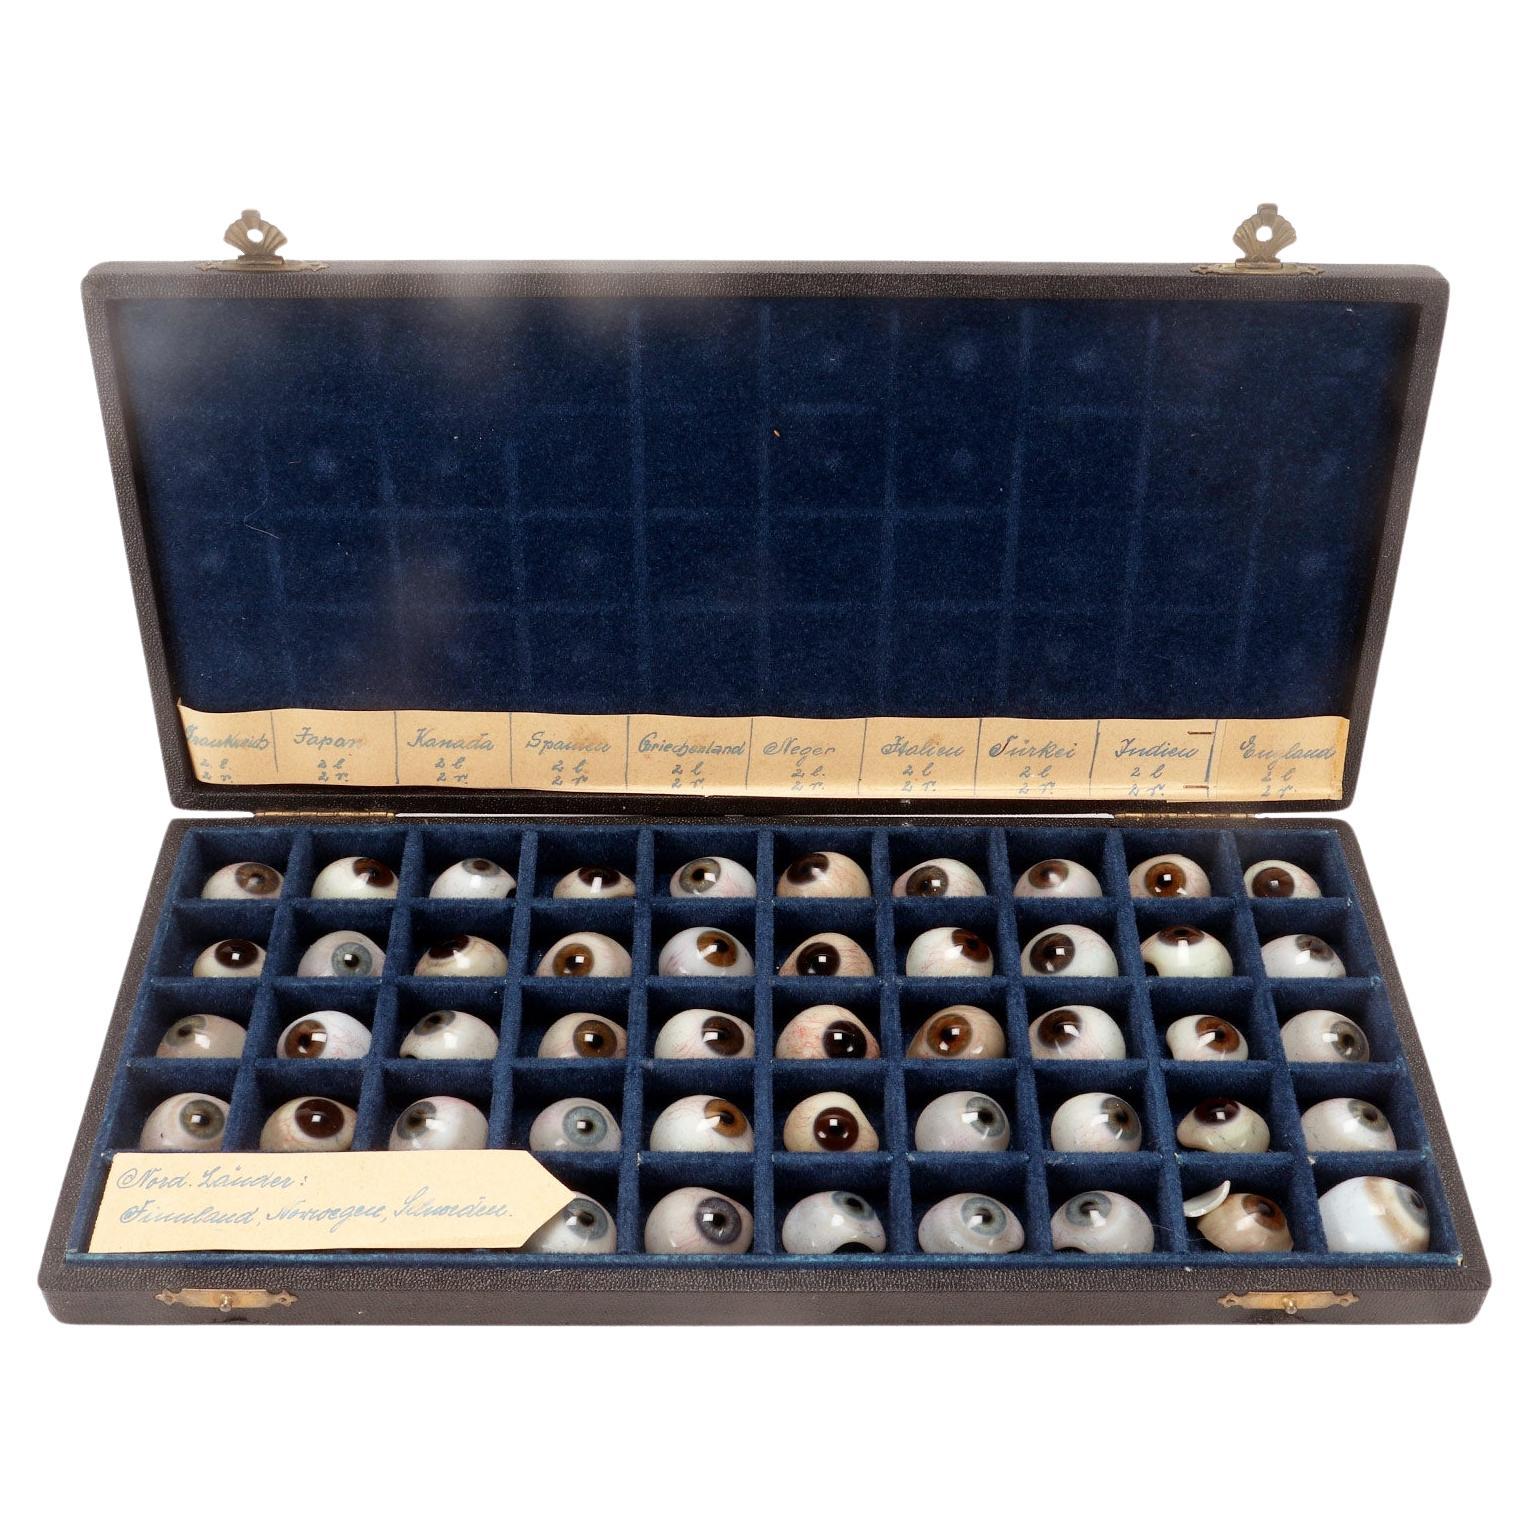 An amazing antique set of 50 glass prosthetic eyes, Germany early 20th century. 